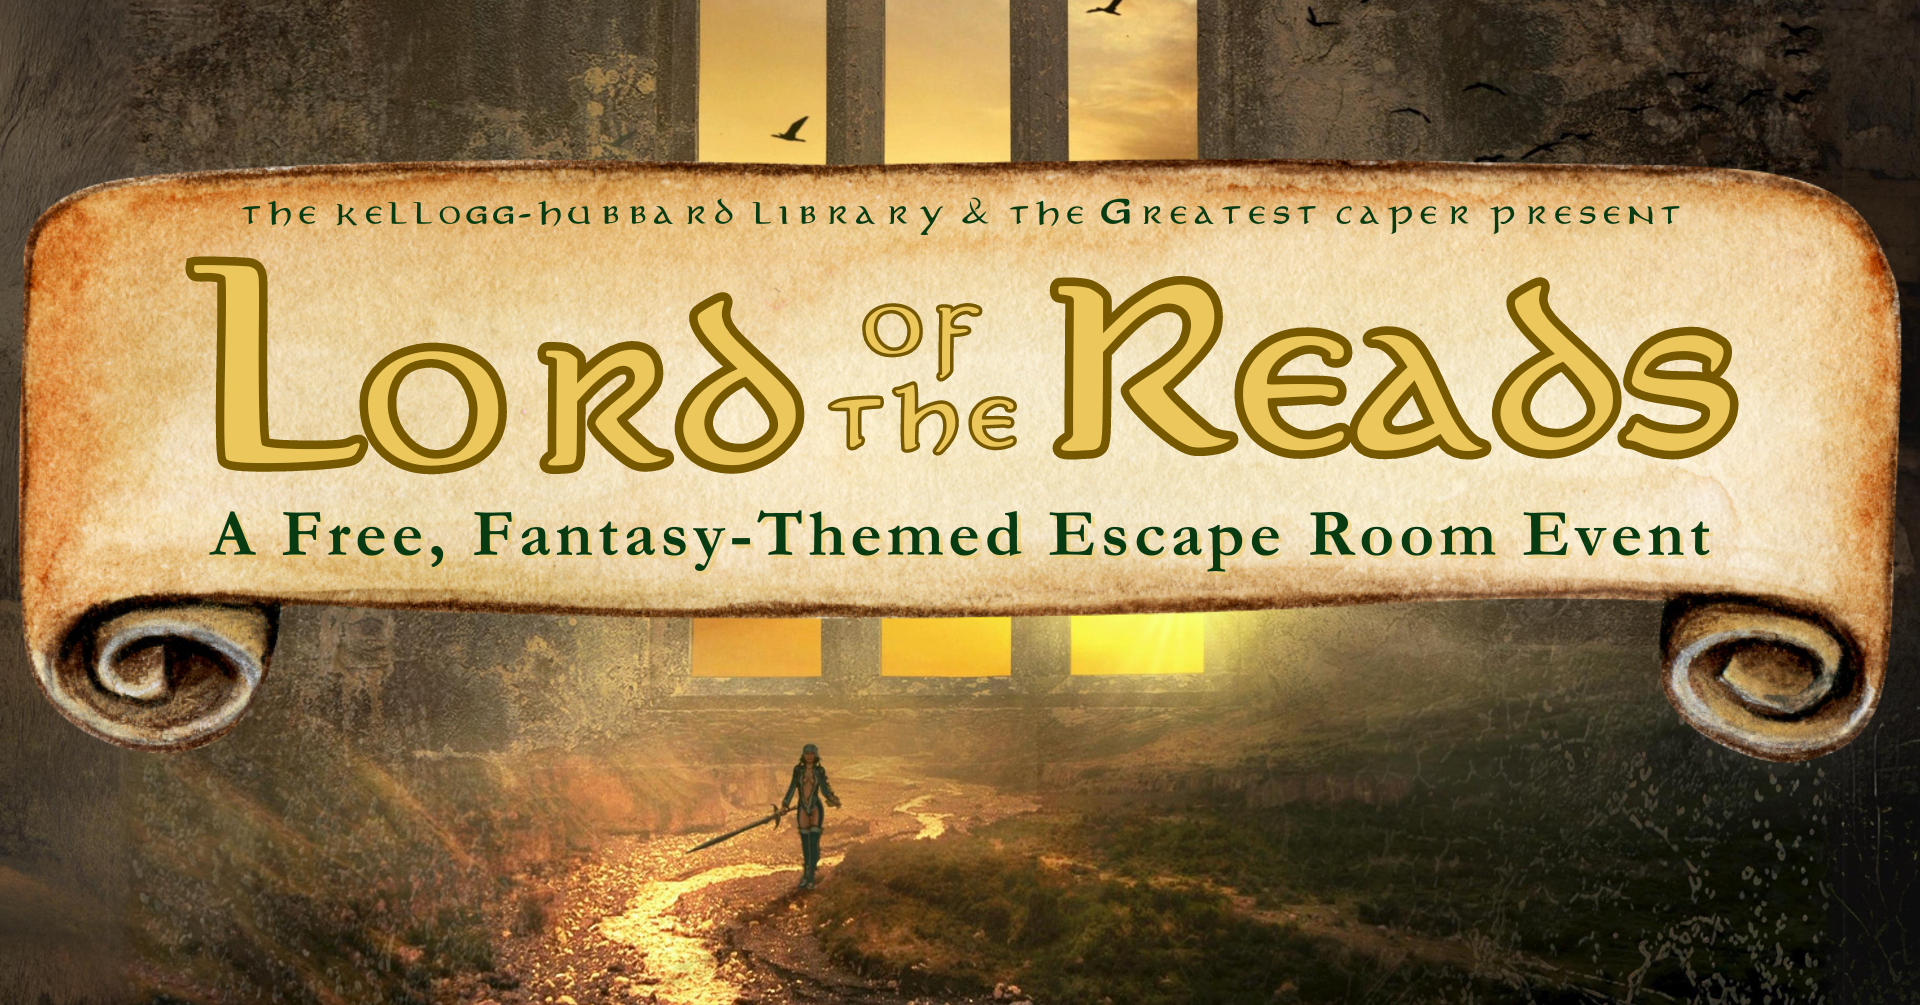 Lord of the Reads Fantasy Escape Room Event!